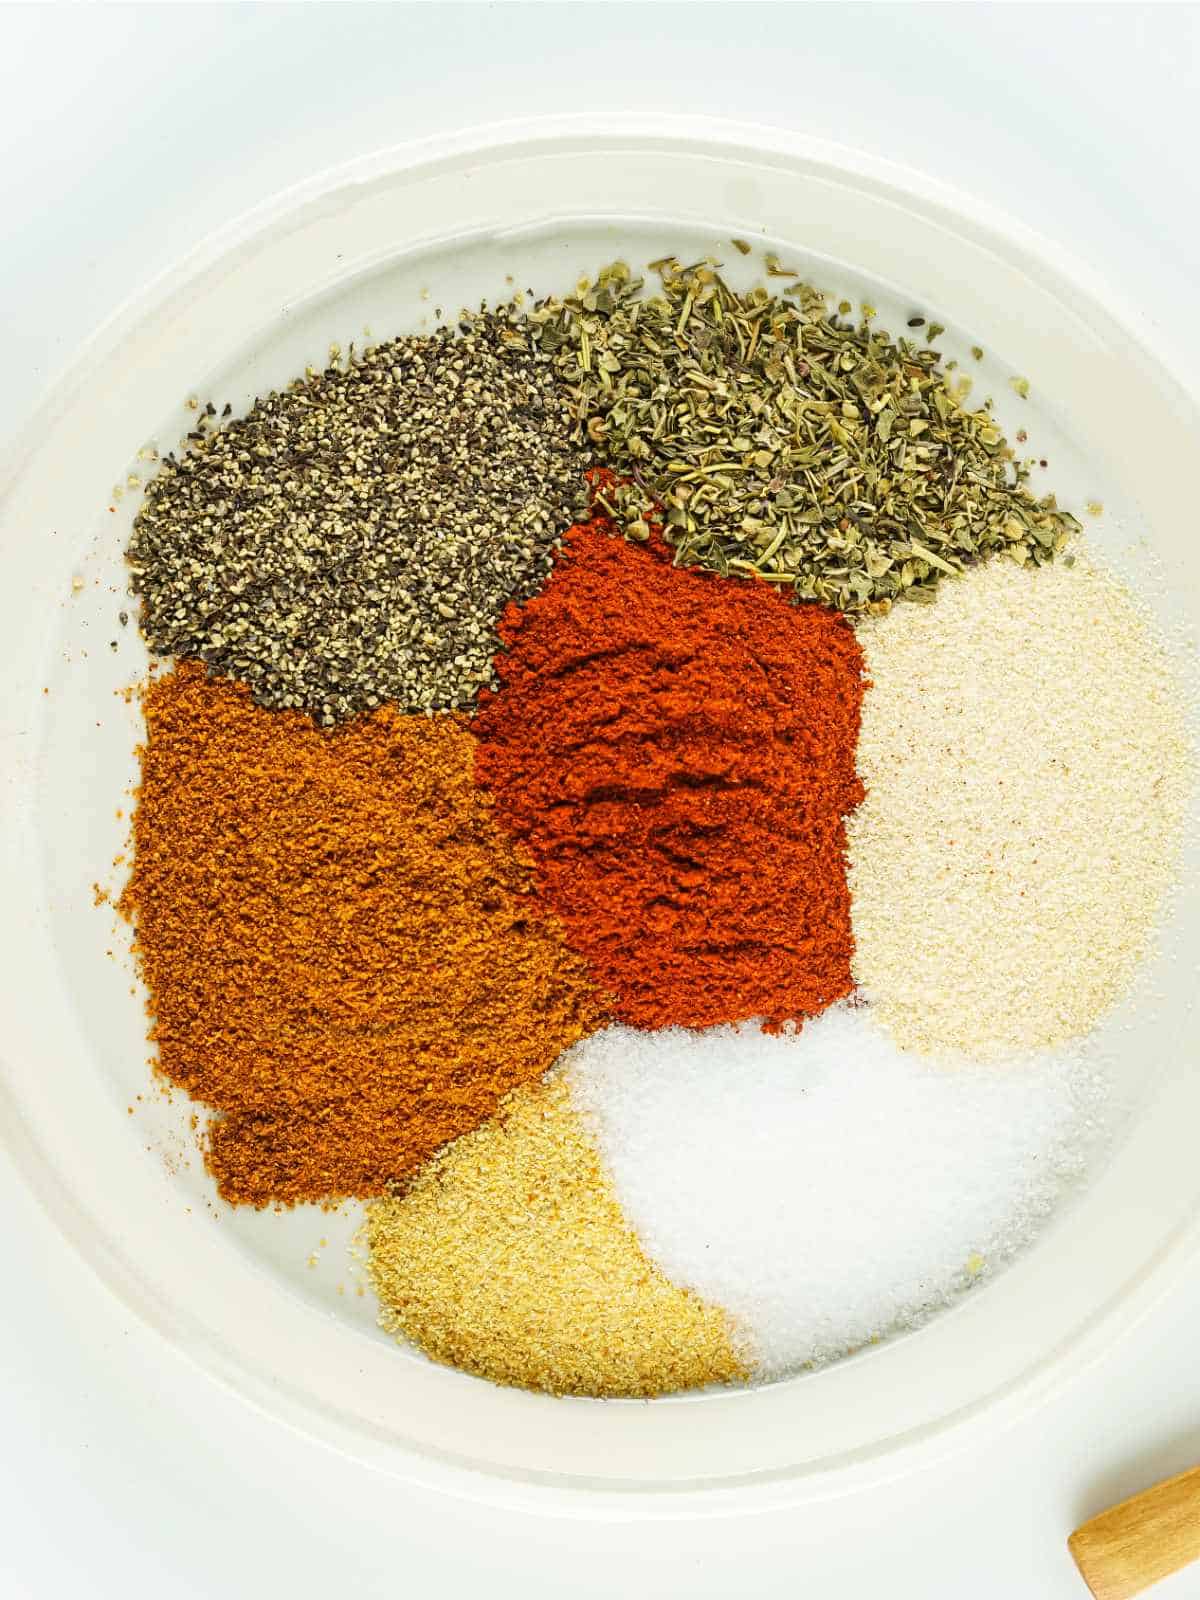 plate of colorful herbs for blending.